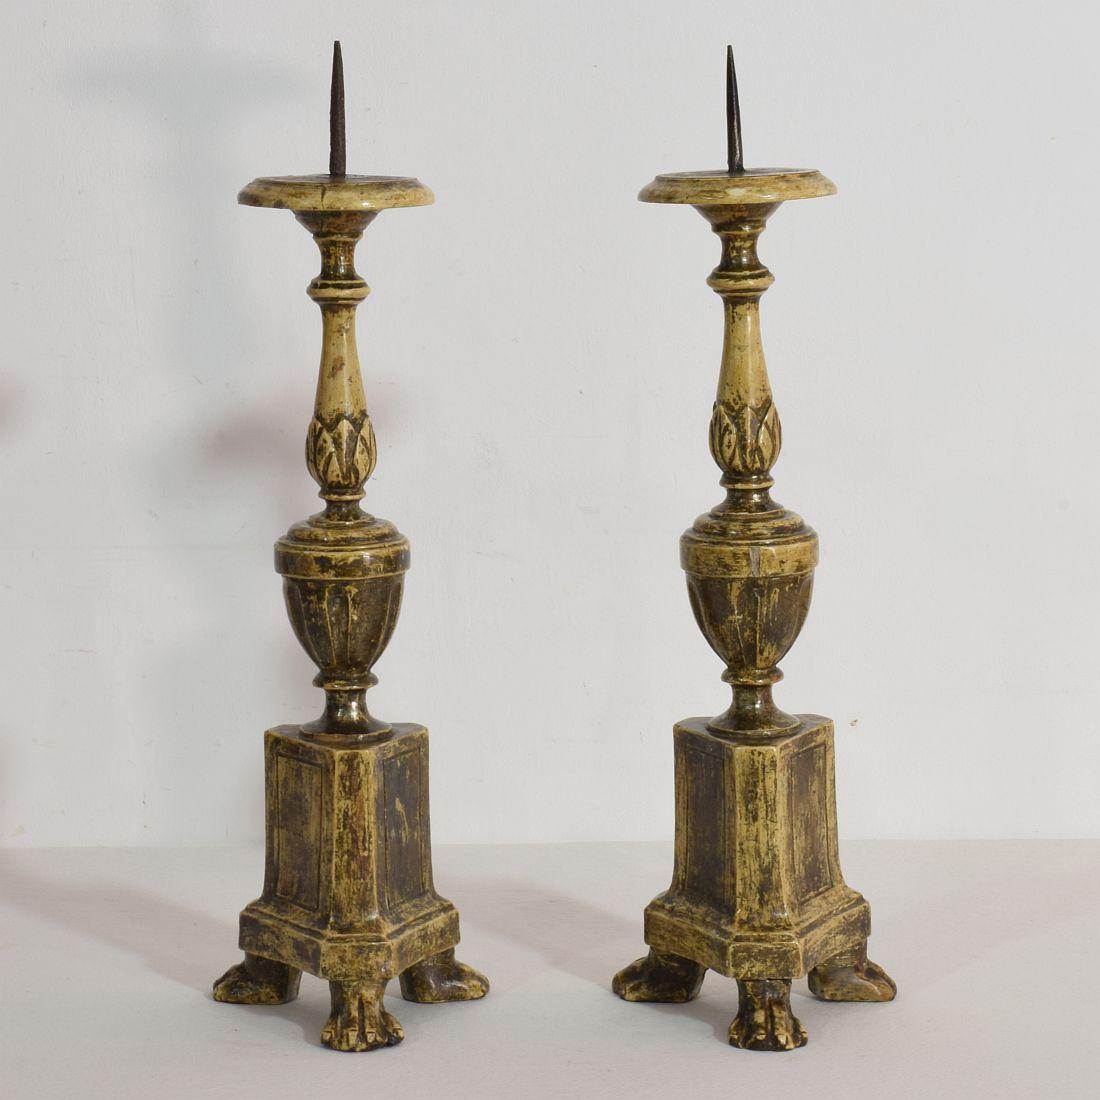 Great pair of carved wooden candleholders with beautiful warm patine of faded silver,
Italy, circa 1780-1800.
Weathered and small losses.